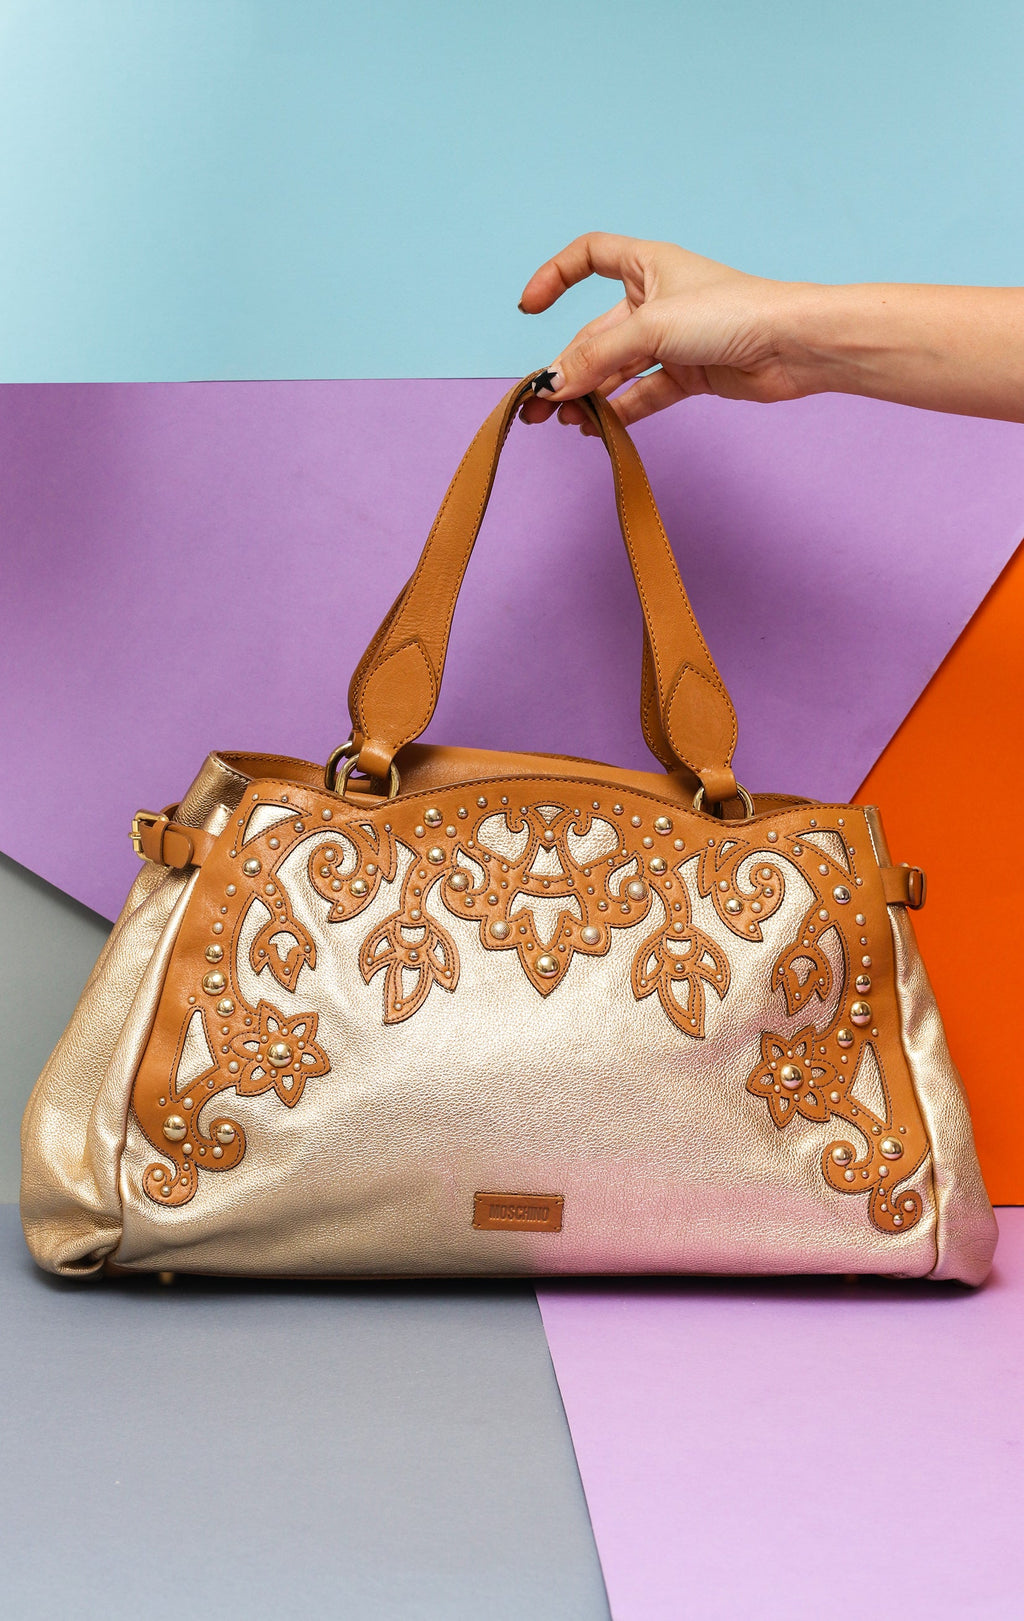 MOSCHINO BAG - Gold with beige details - 26 x 38 cm